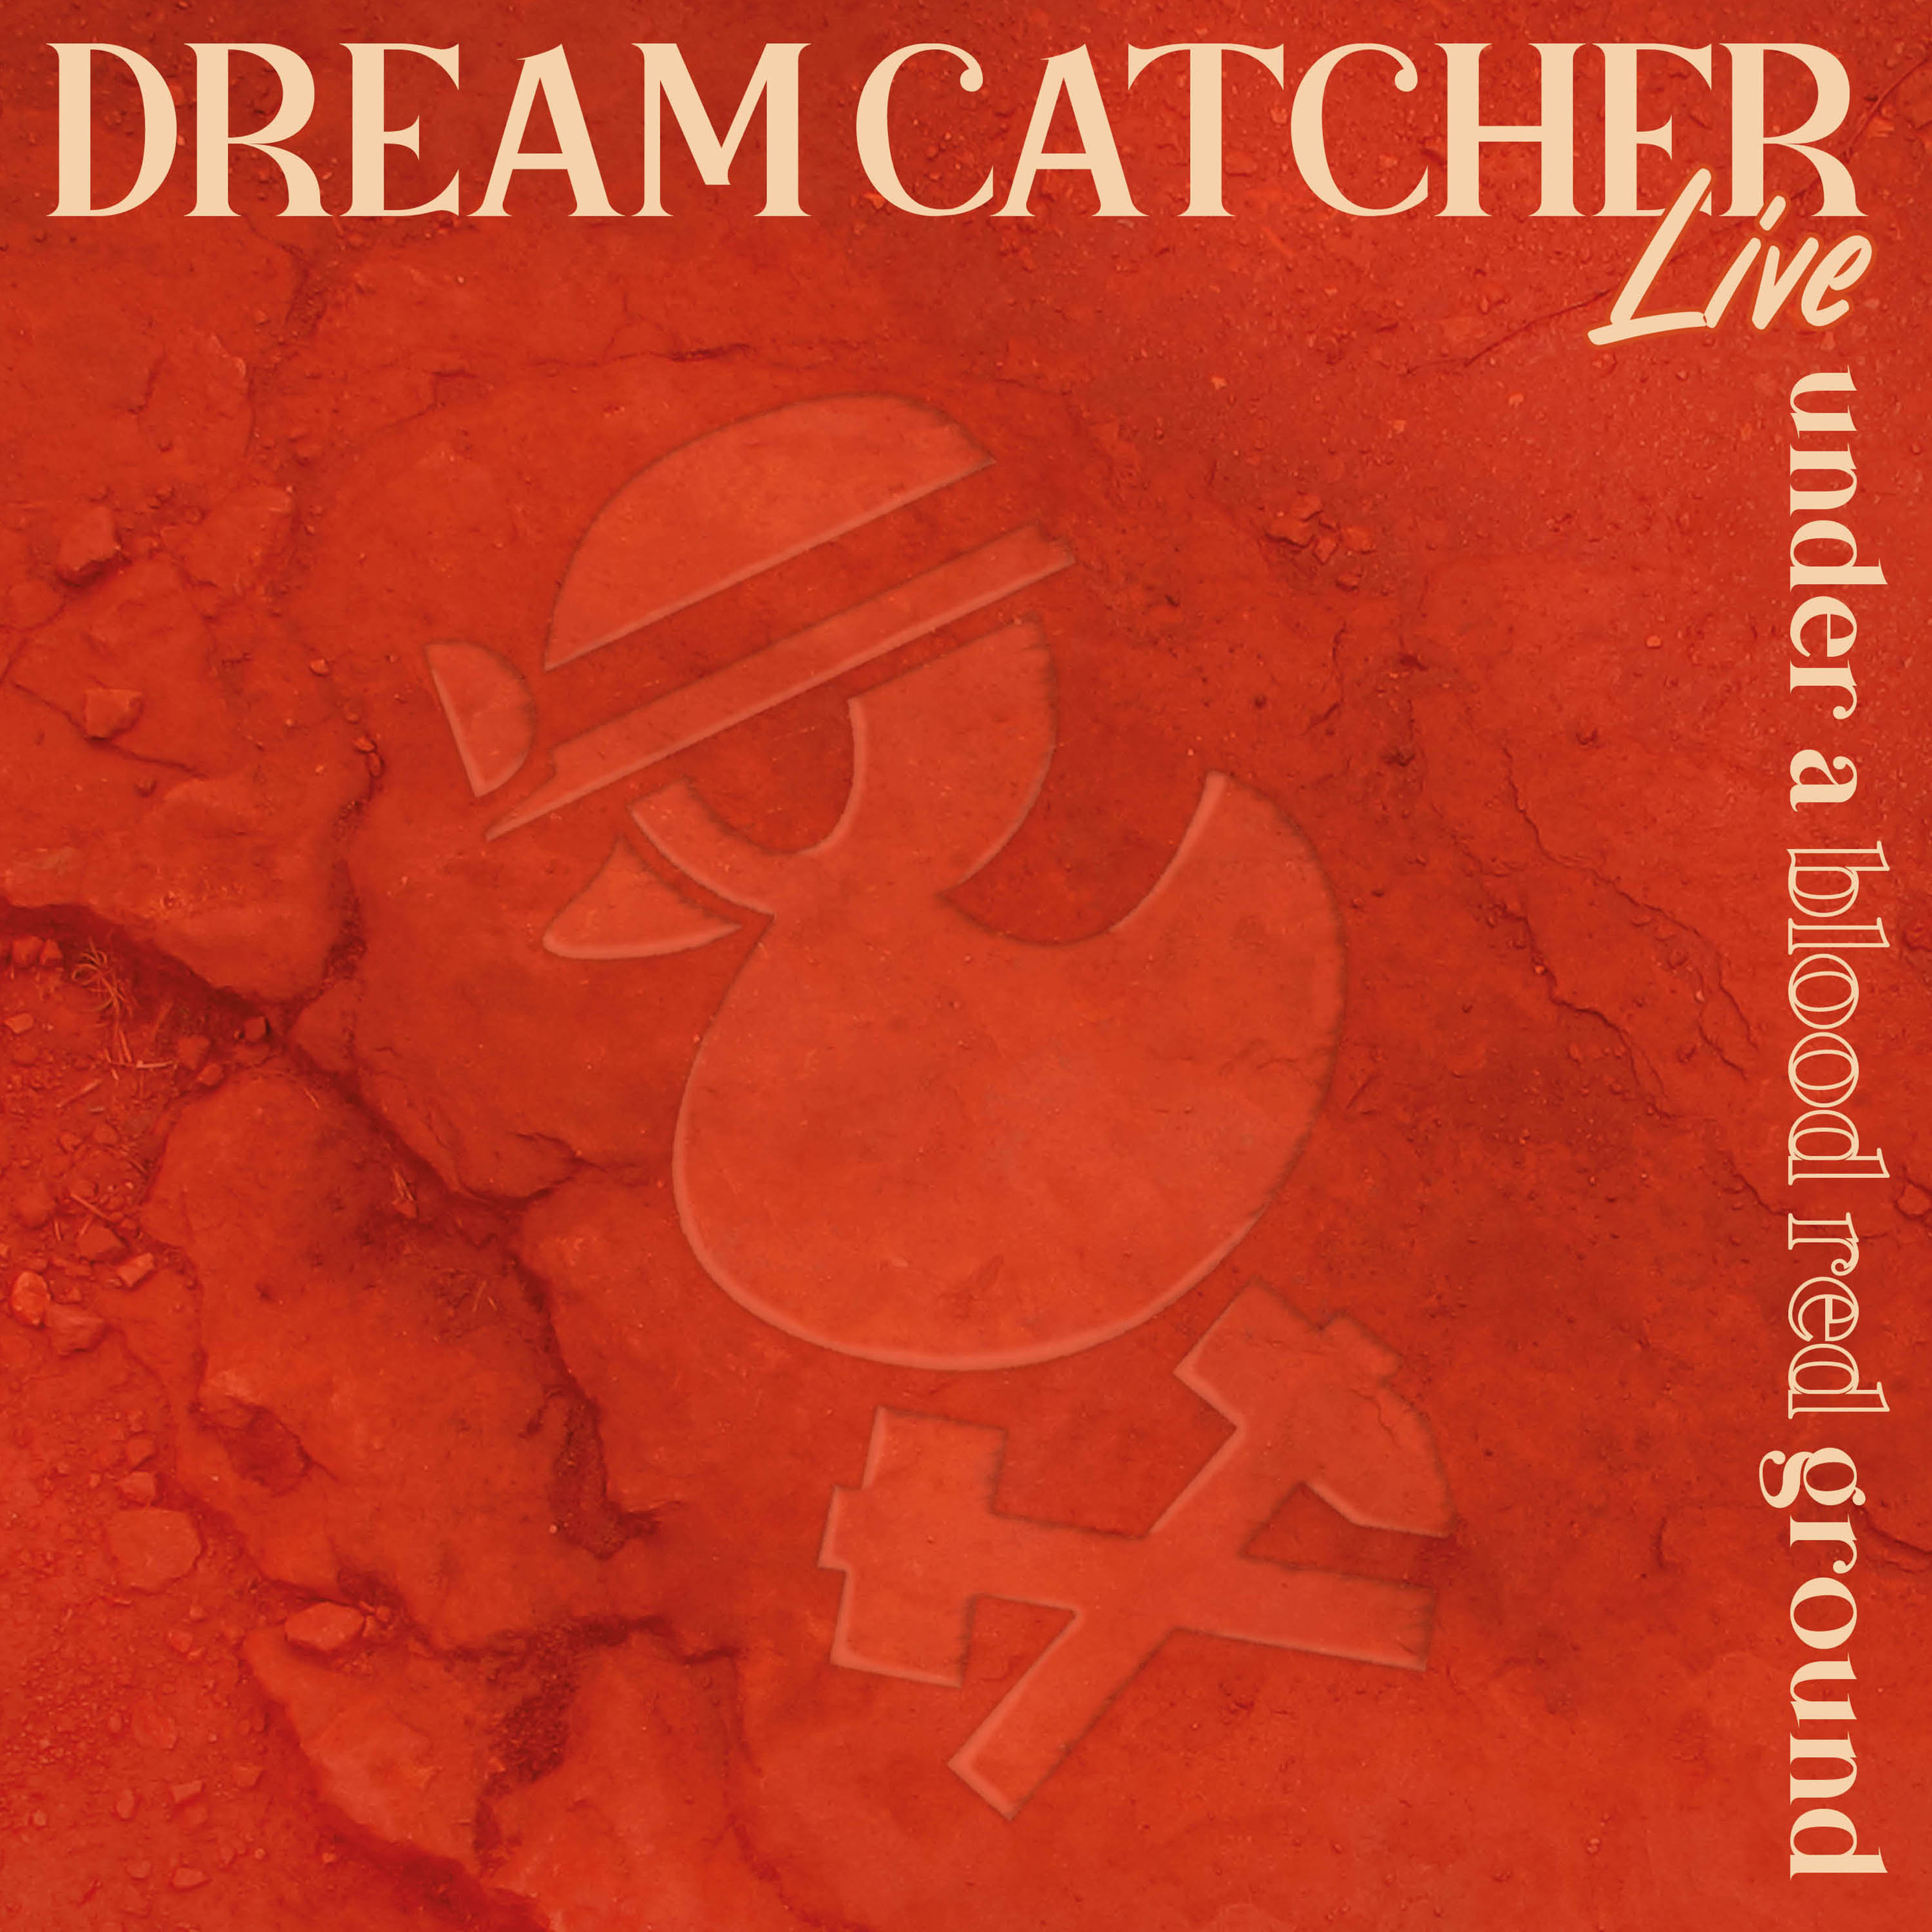 Dream Catcher – Live – Under a blood red ground (cover)